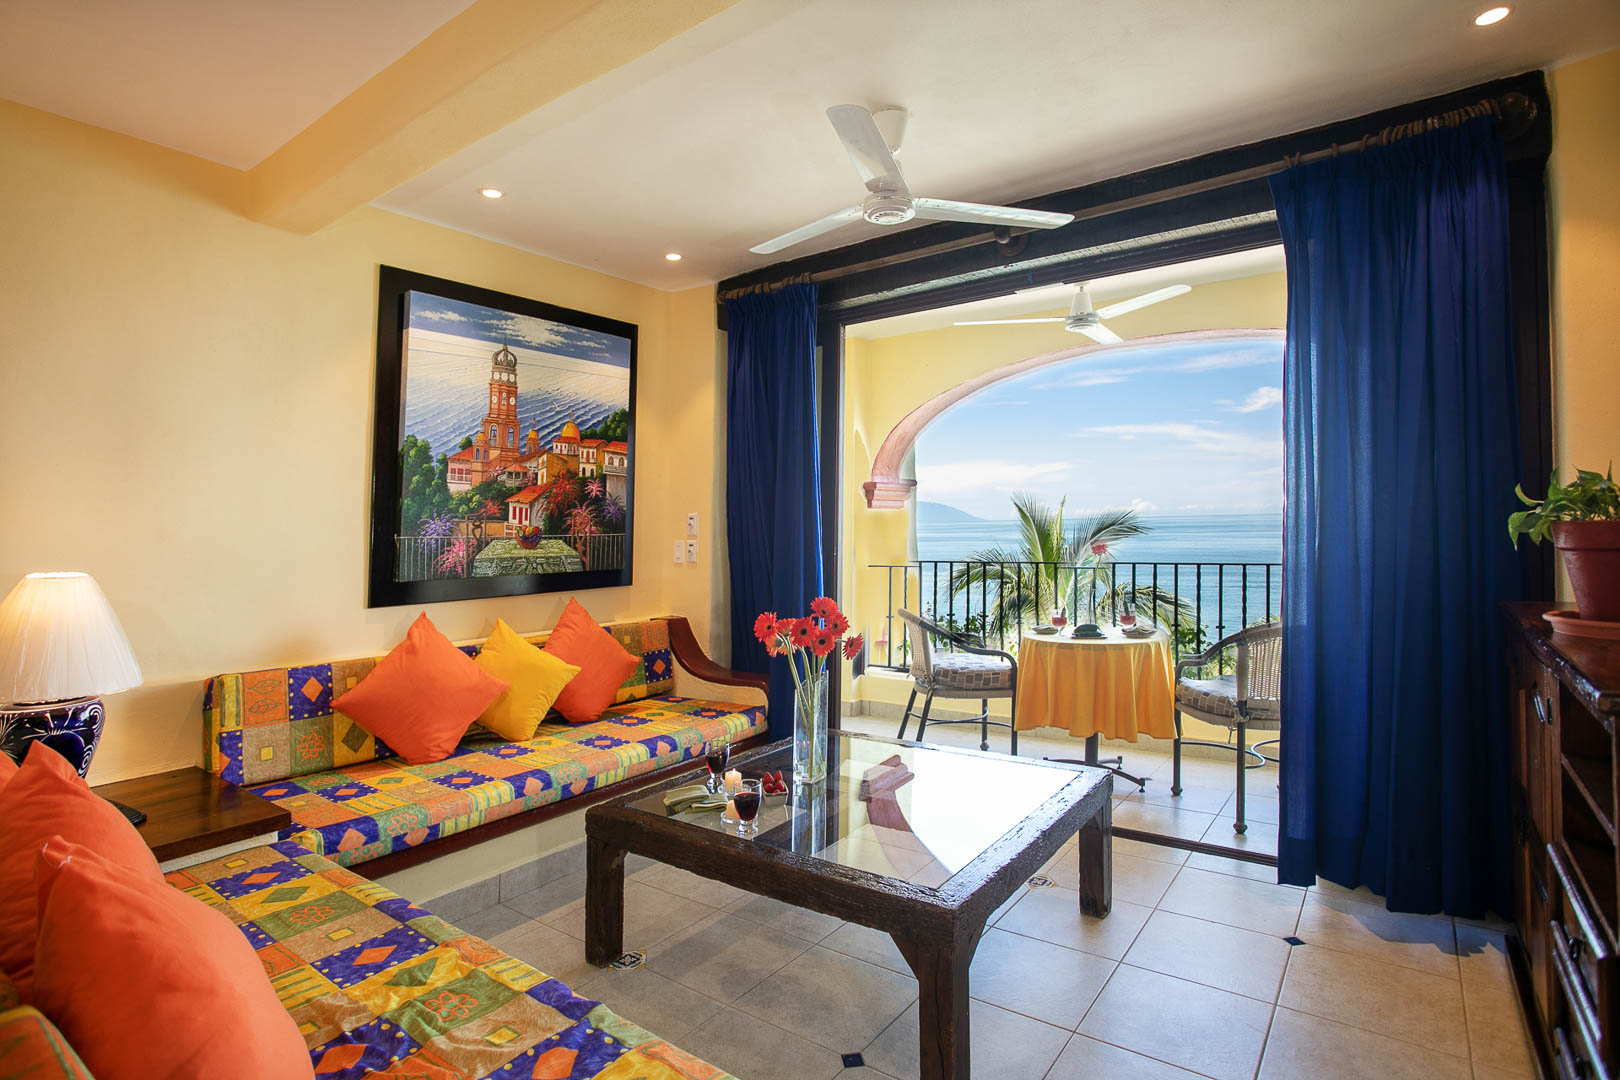 A vibrant living room with a view that oversees the ocean at TPI's Lindo Mar Resort in Puerto Vallarta, Mexico.